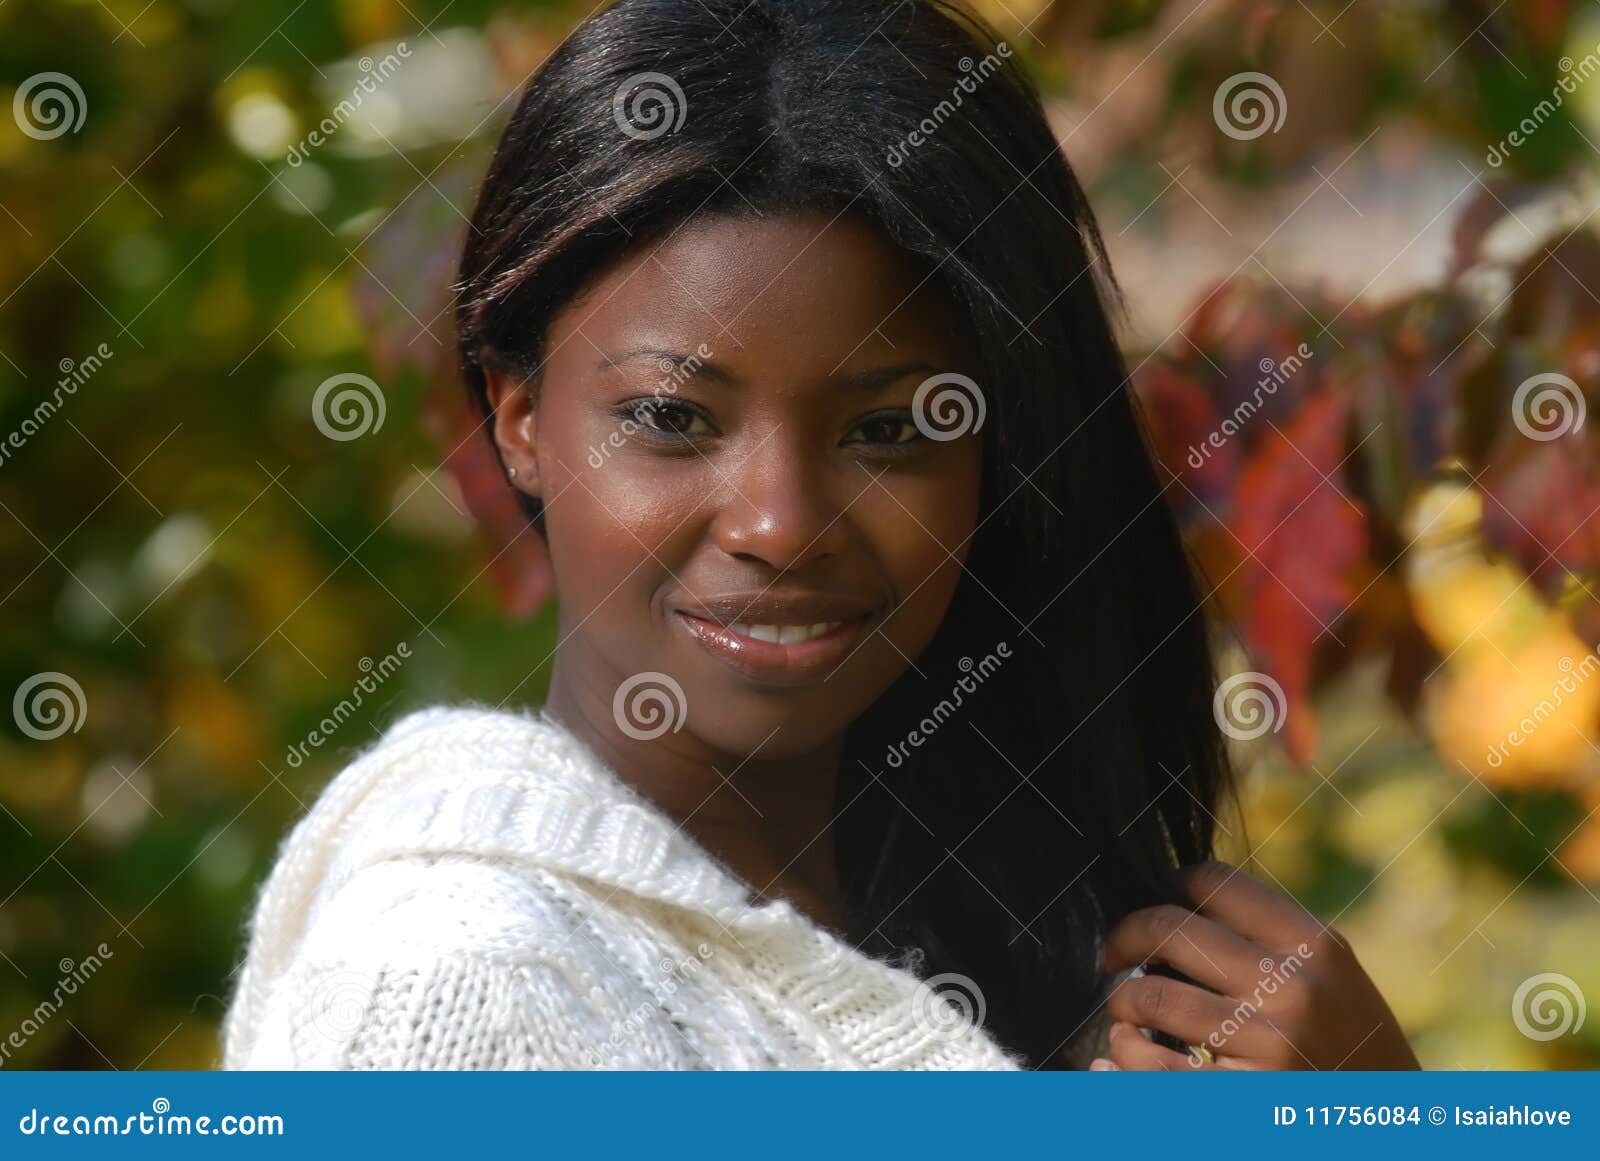 African American Woman With Beautiful Smile Stock Photo Image Of